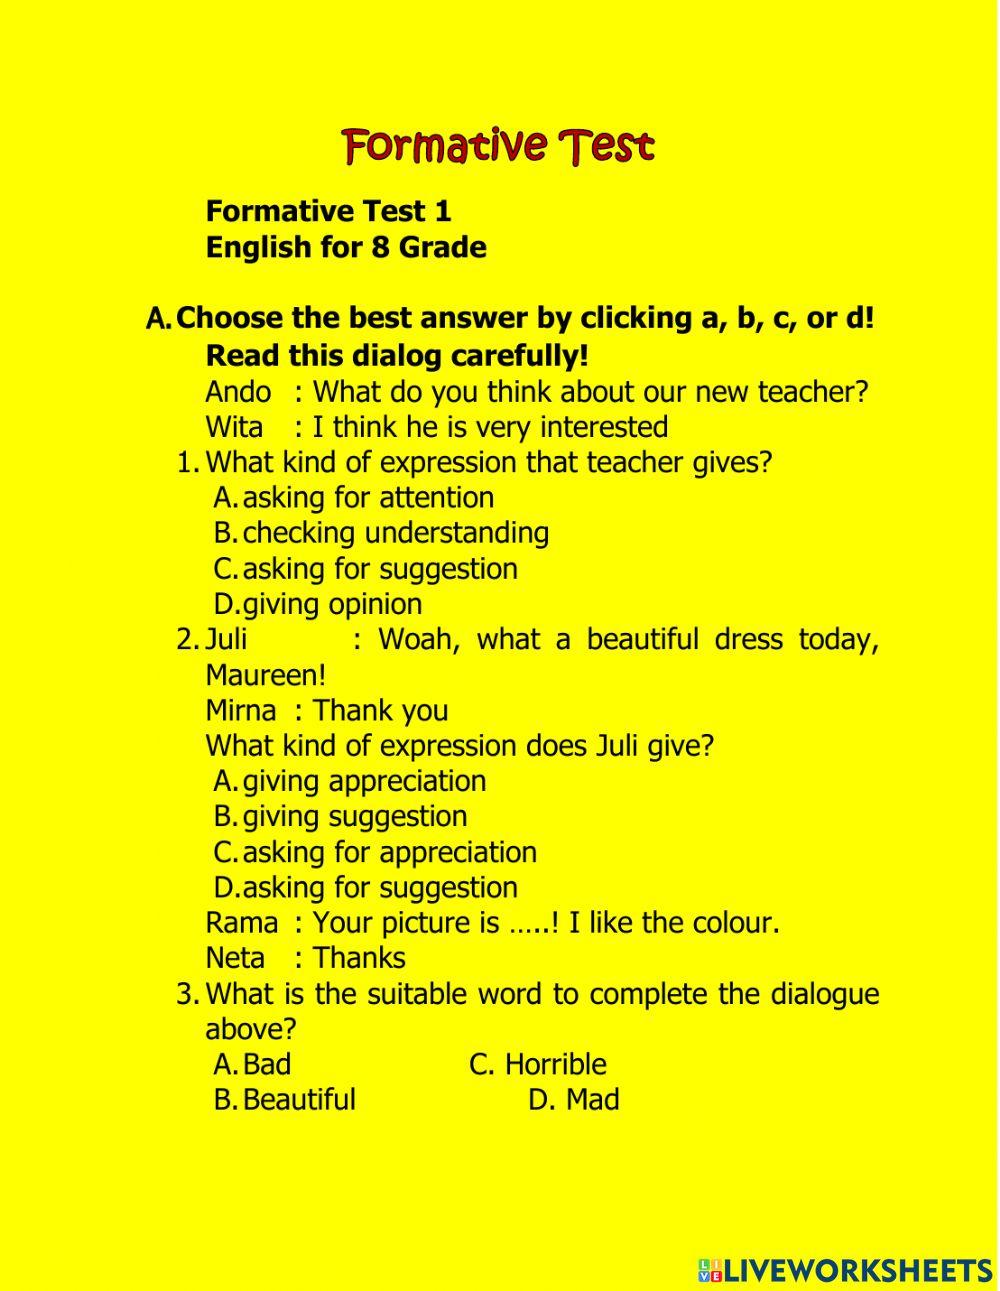 Formative Test